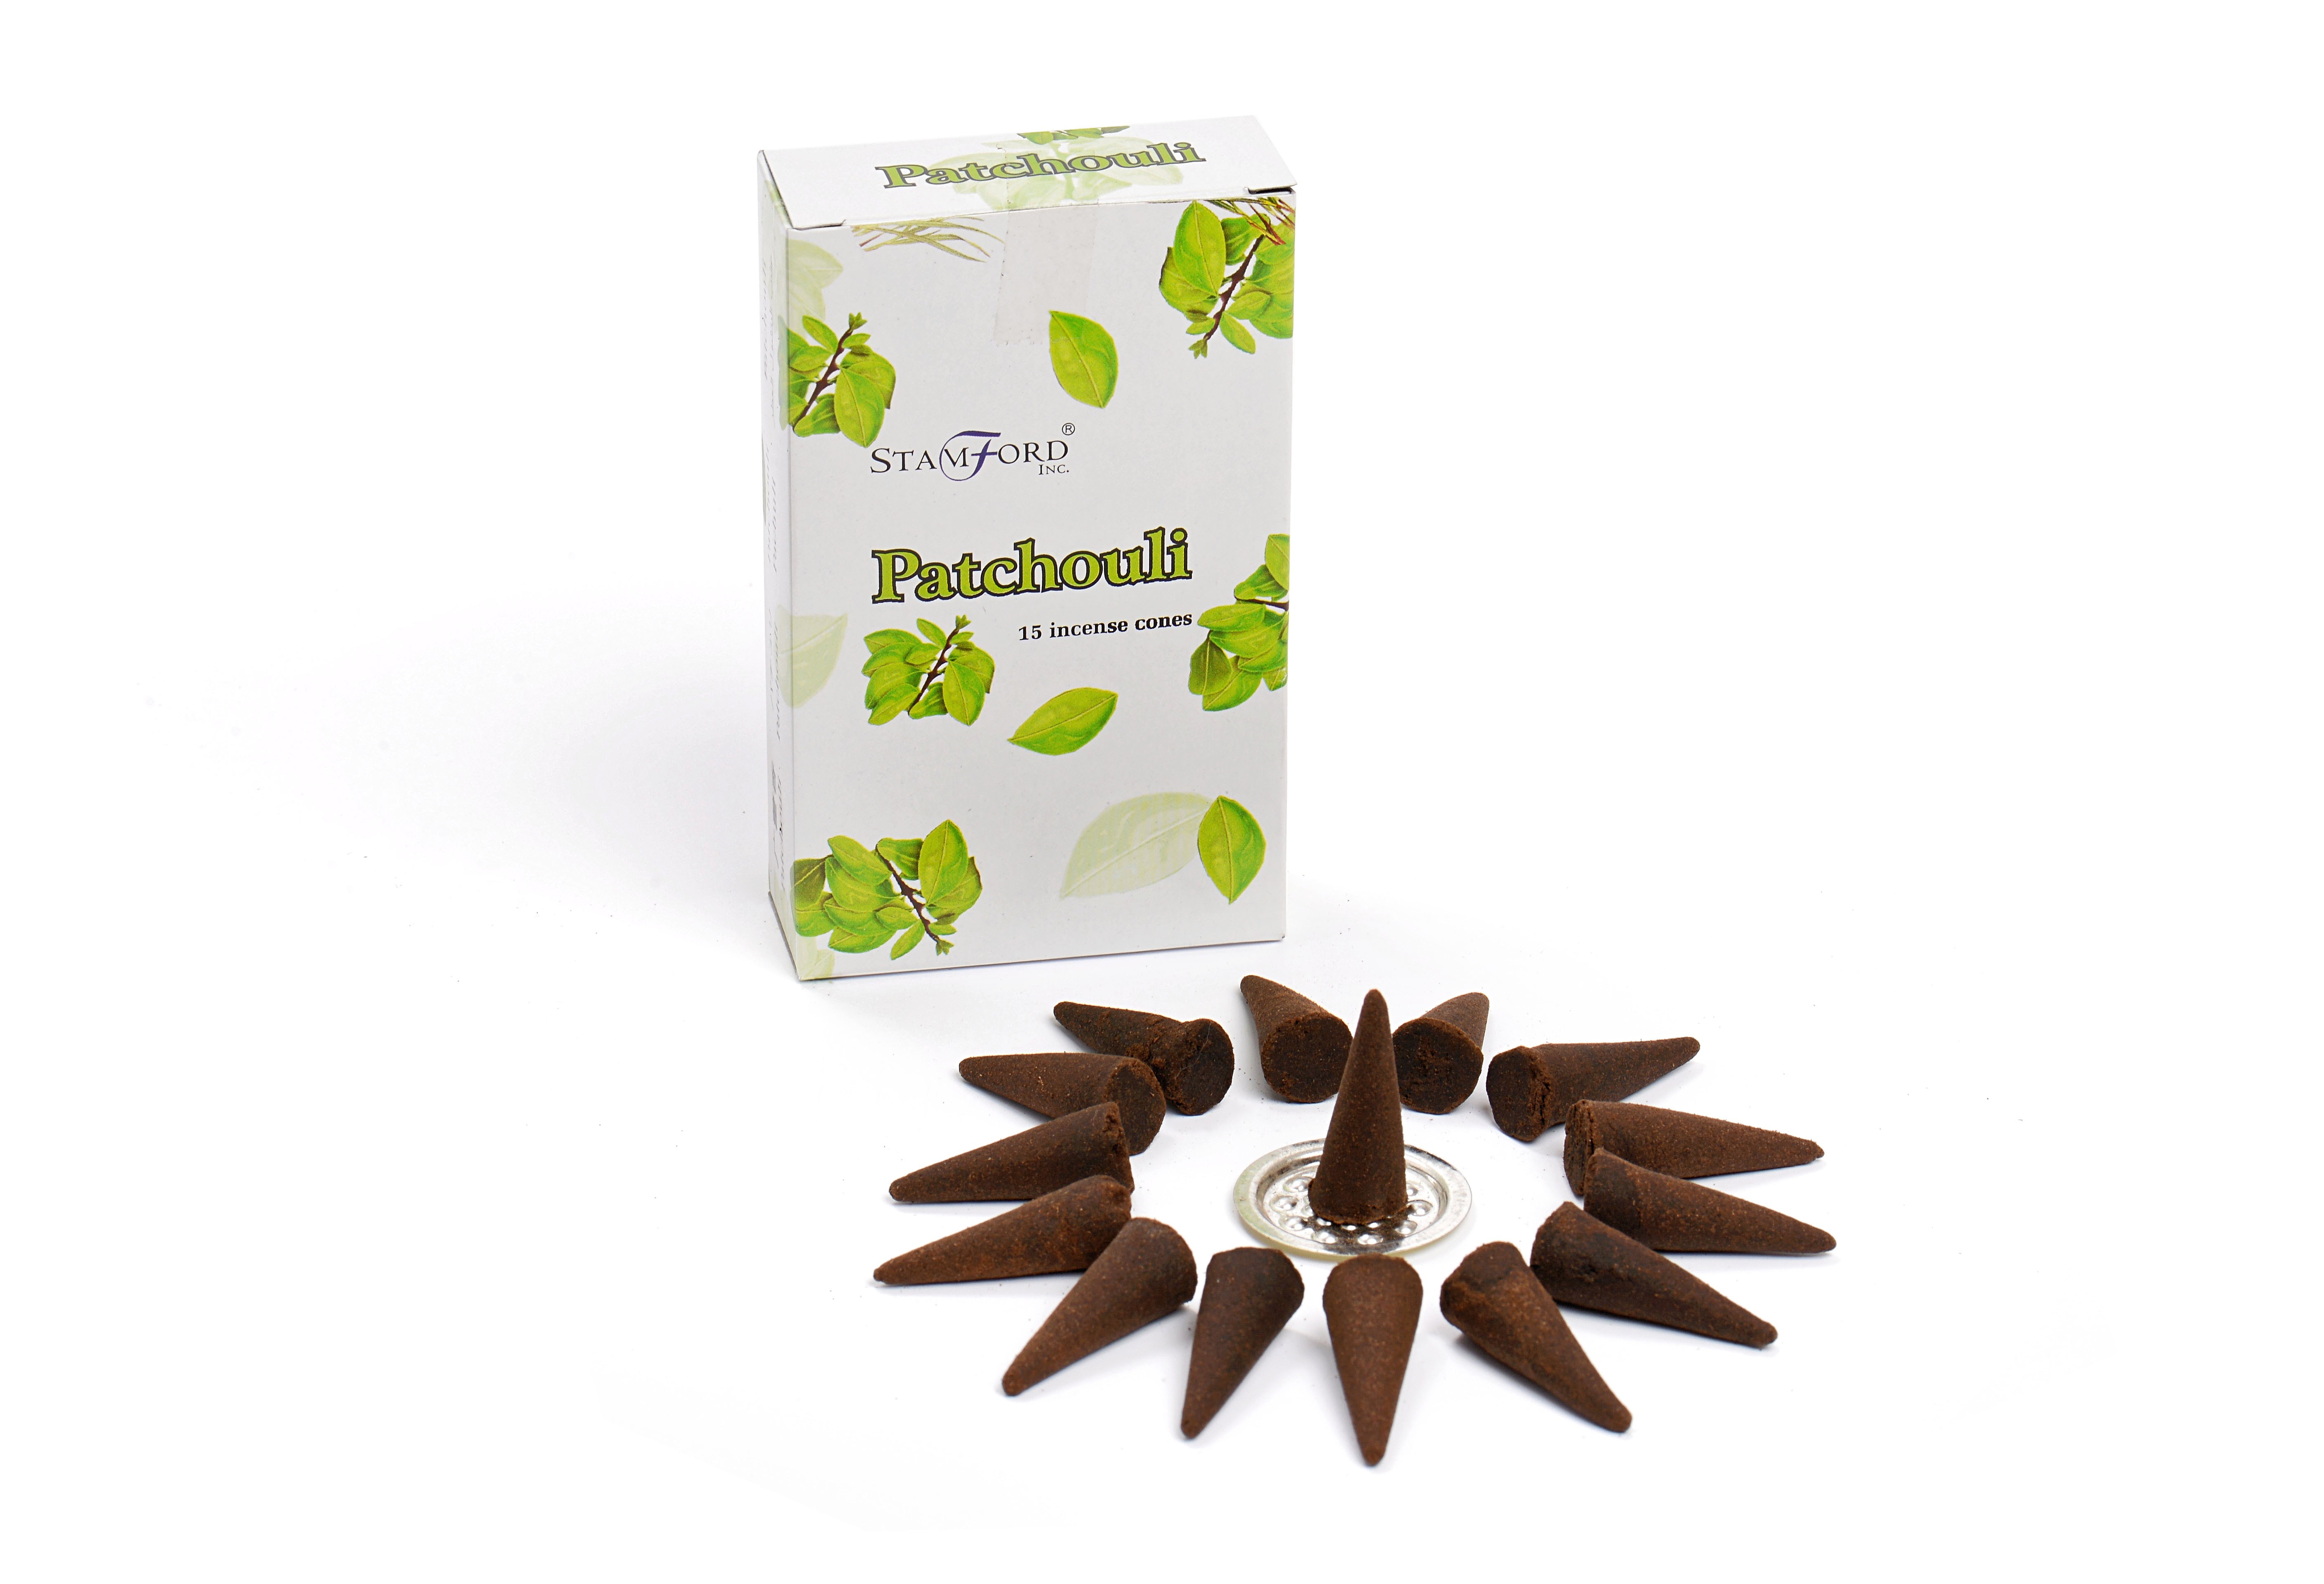 Patchouli Stamford Incense Cones and Metal Holder